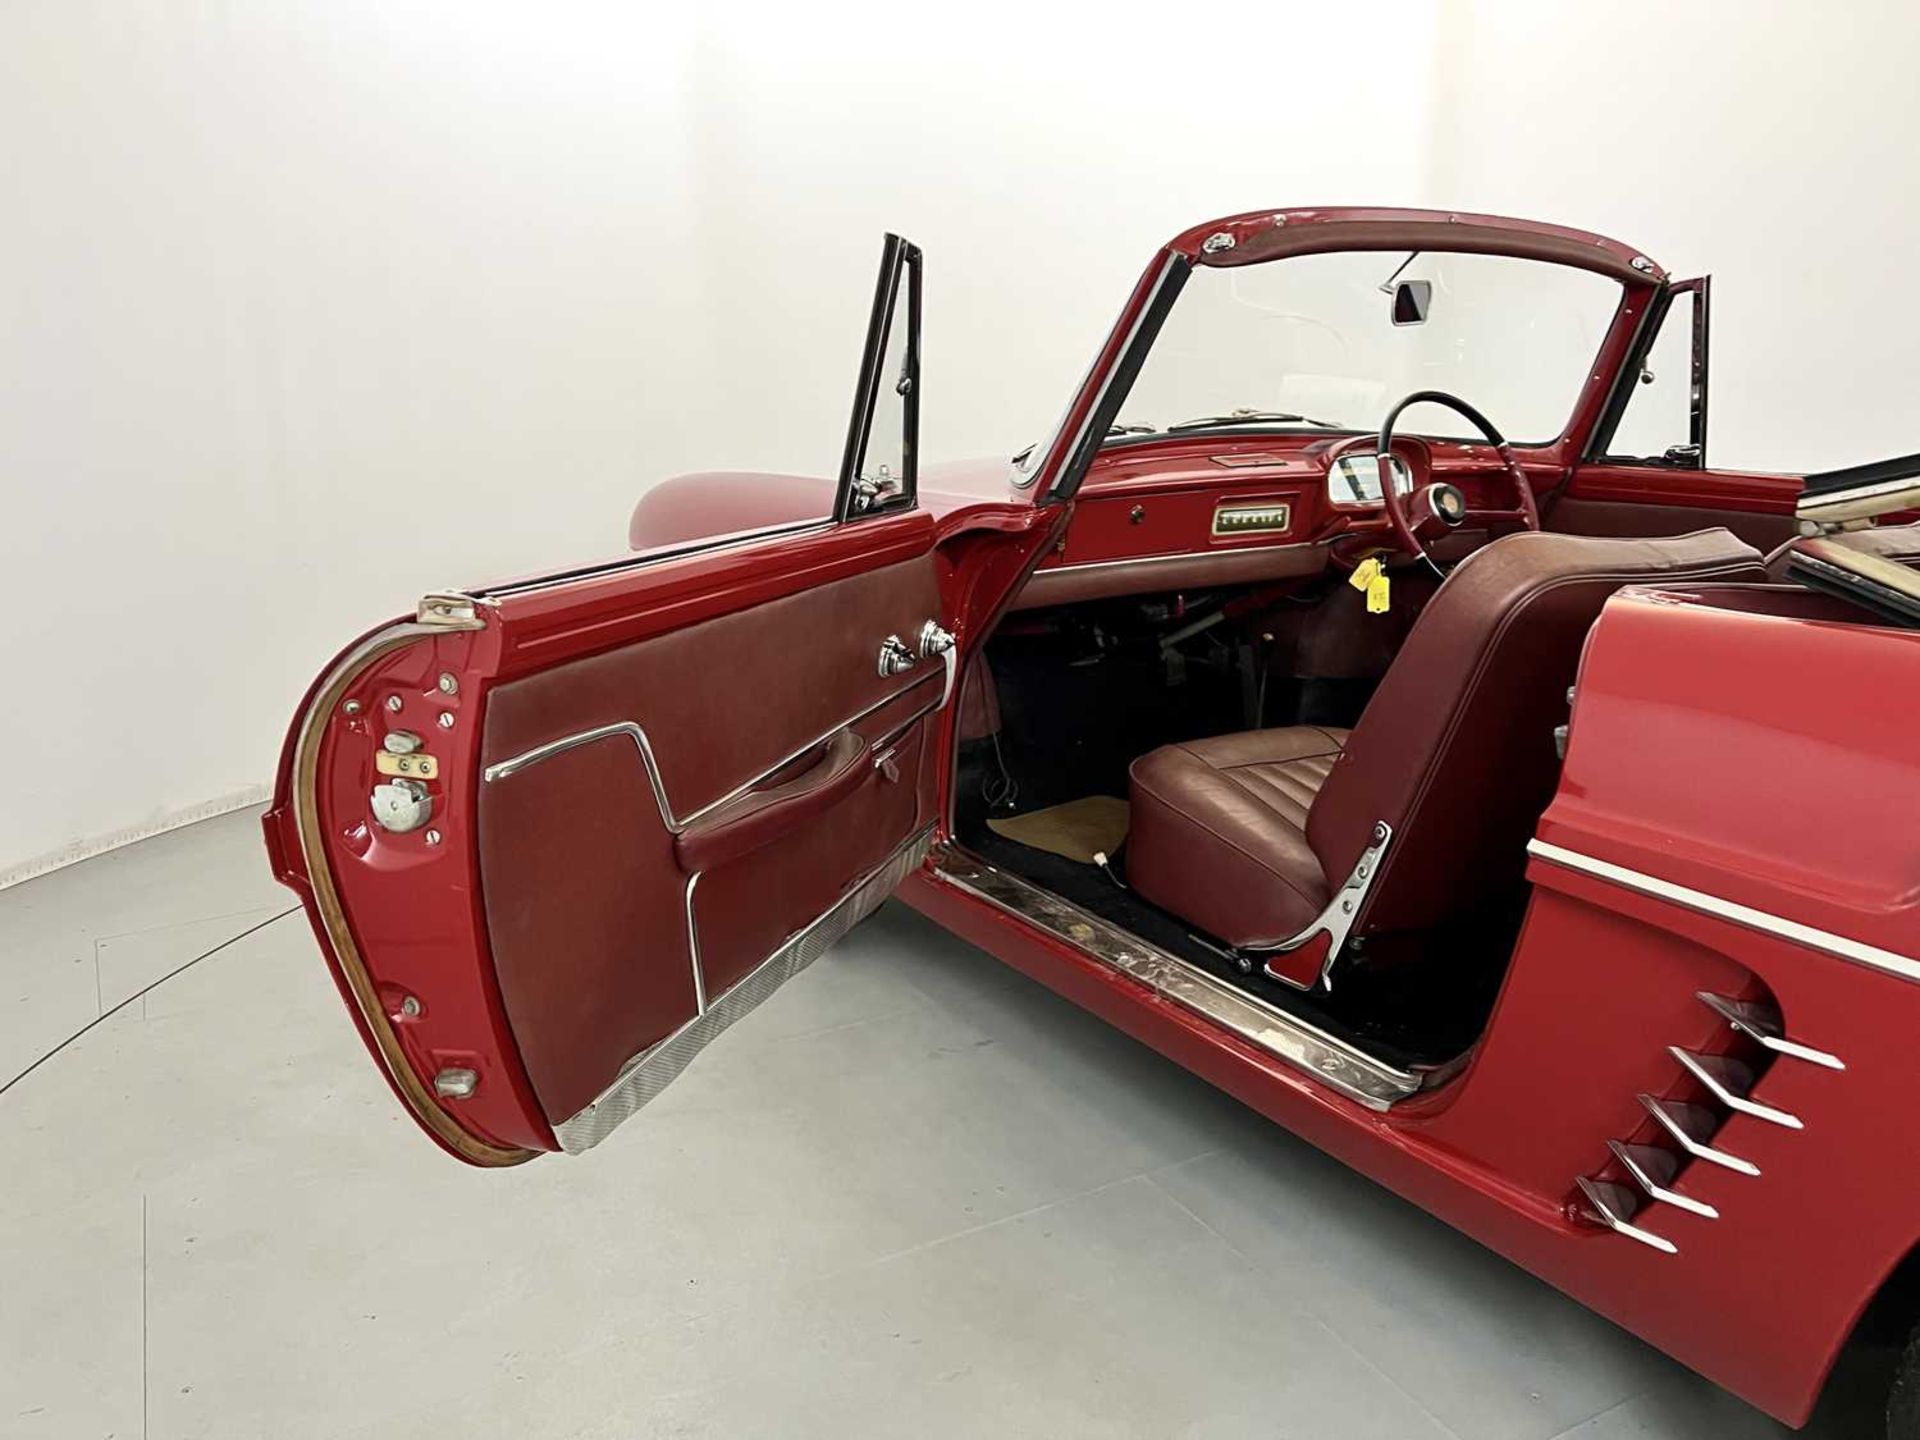 1962 Renault Floride Convertible - Image 34 of 43